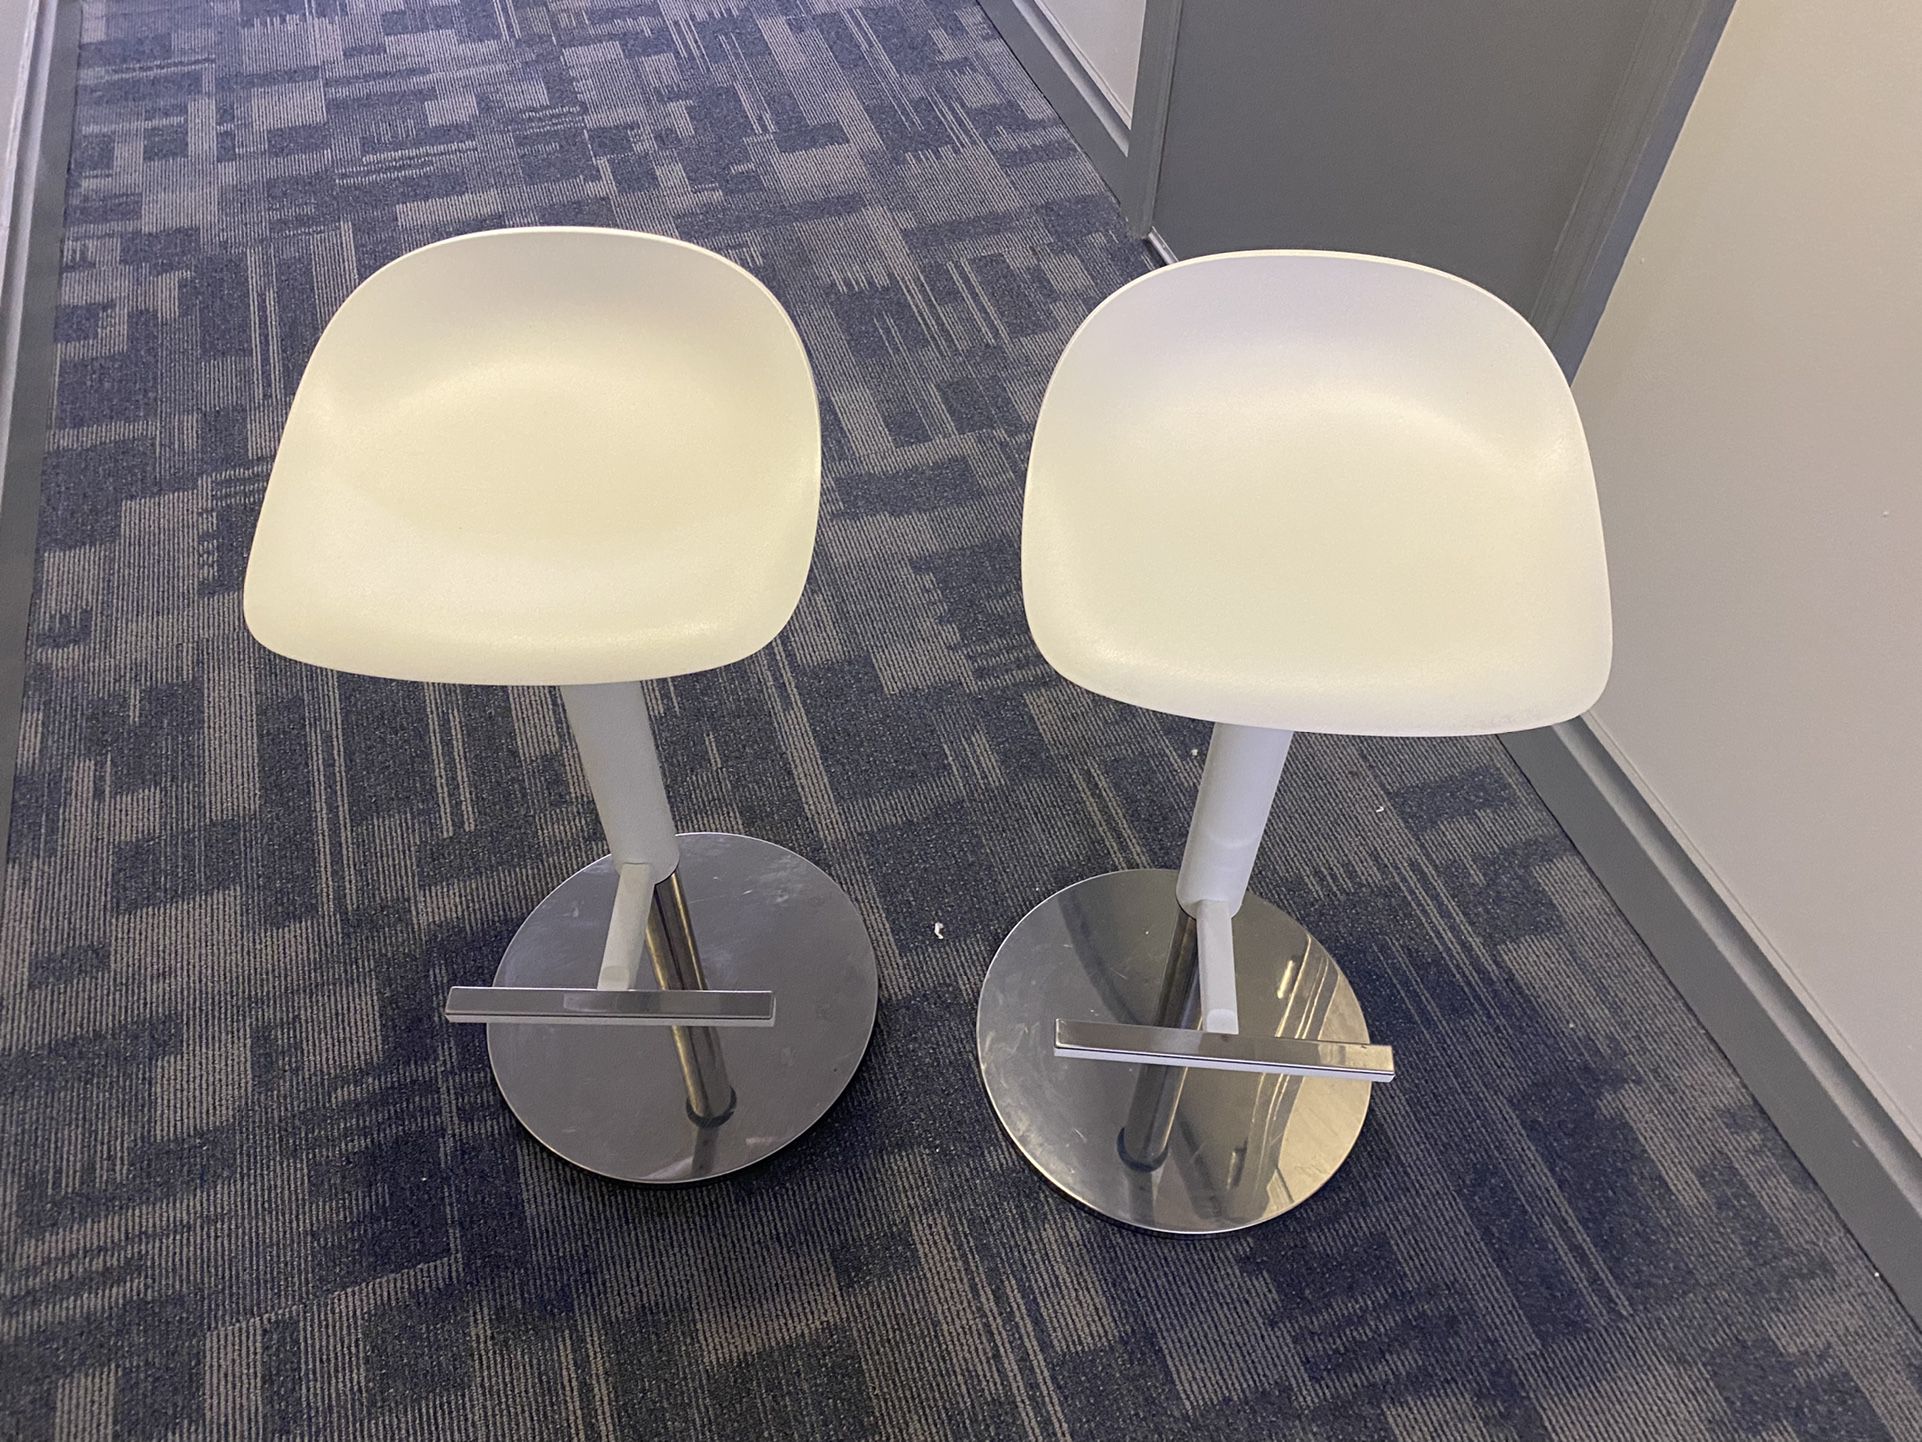 2 Bar Stools For $100 Or 4 For $250